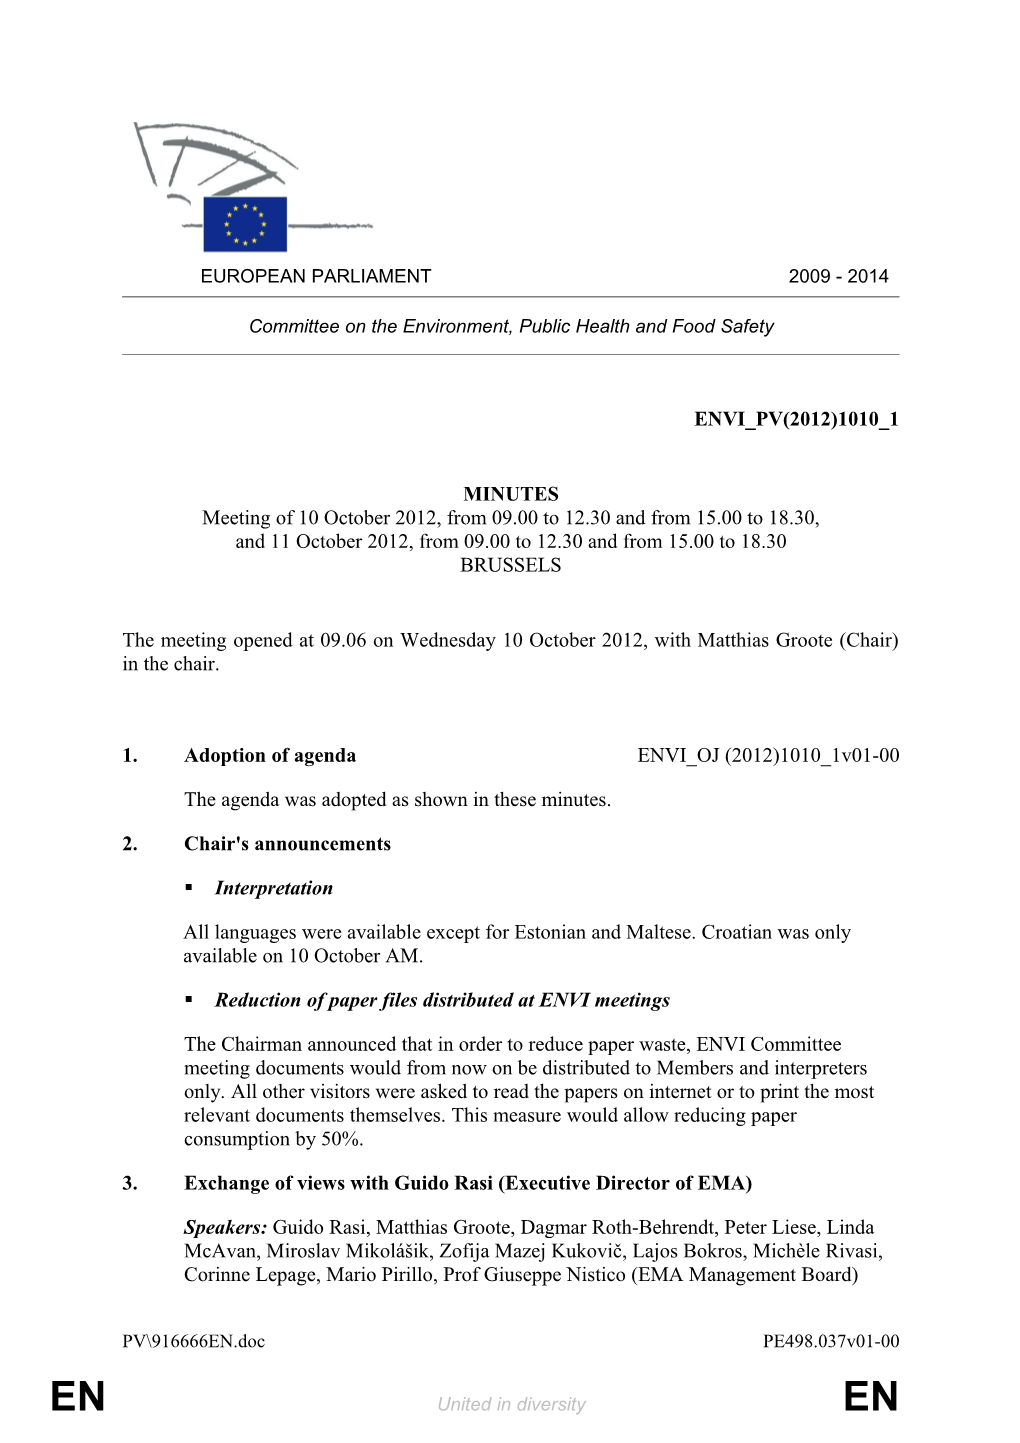 Commission&gt; ENVI Committee on the Environment, Public Health and Food Safety&lt;/ Commission